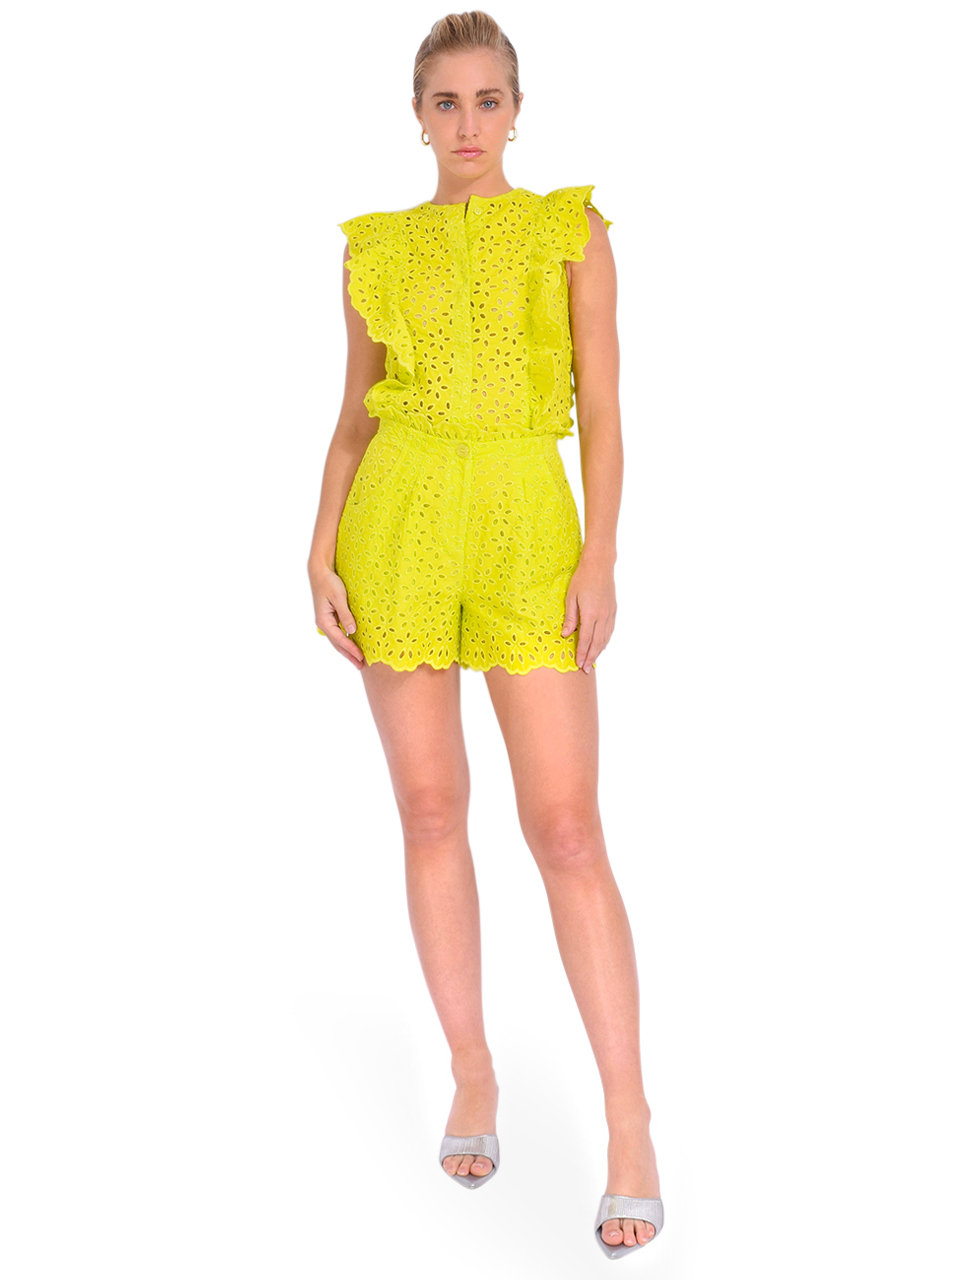 ESSENTIEL ANTWERP Damanna Embroidered Top in Limoncello Full Outfit 